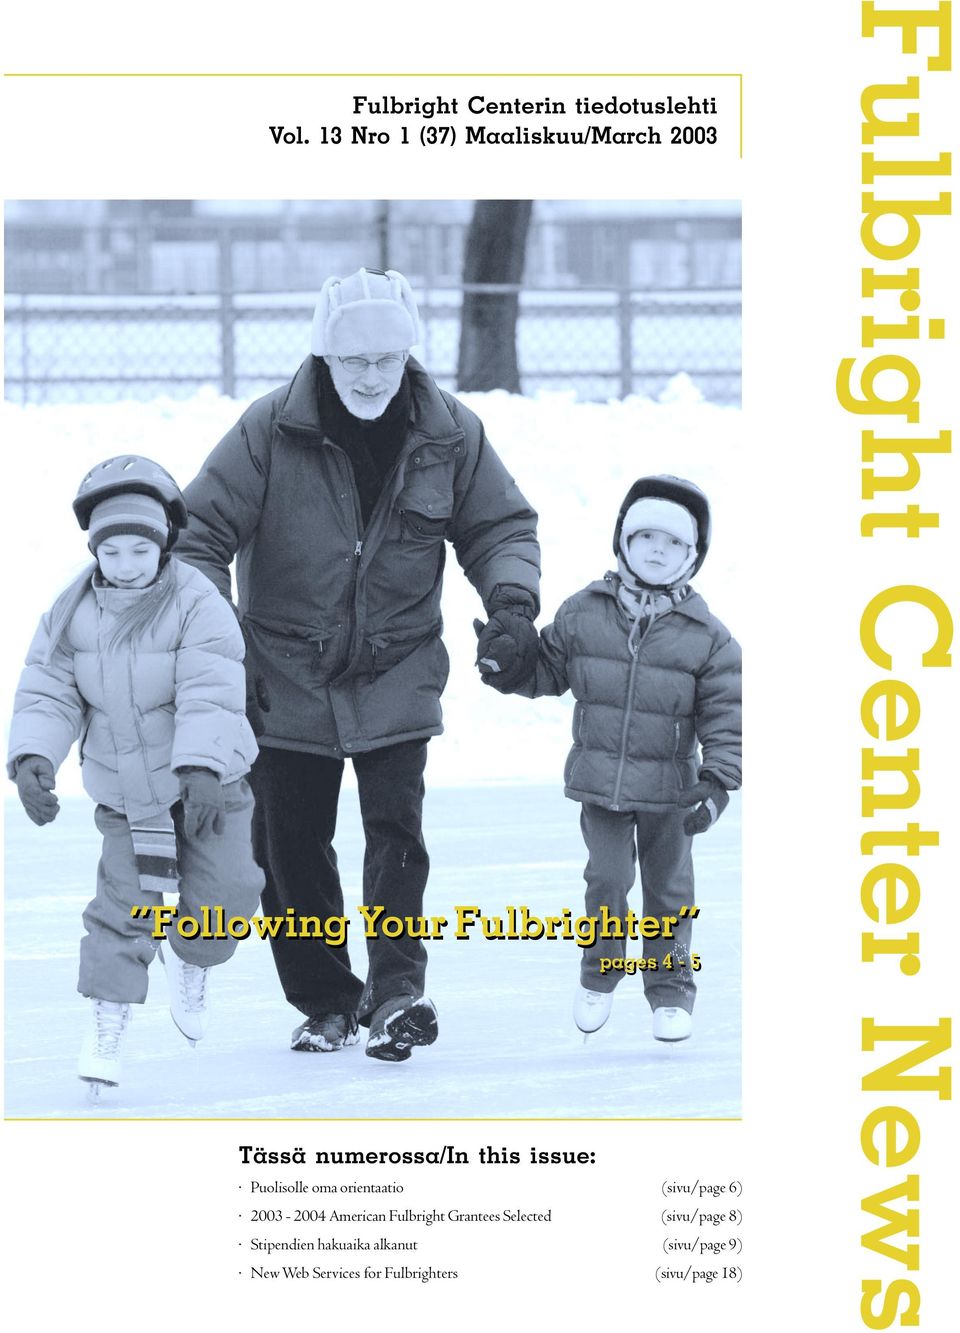 issue: pages 4-5 Puolisolle oma orientaatio (sivu/page 6) 2003-2004 American Fulbright